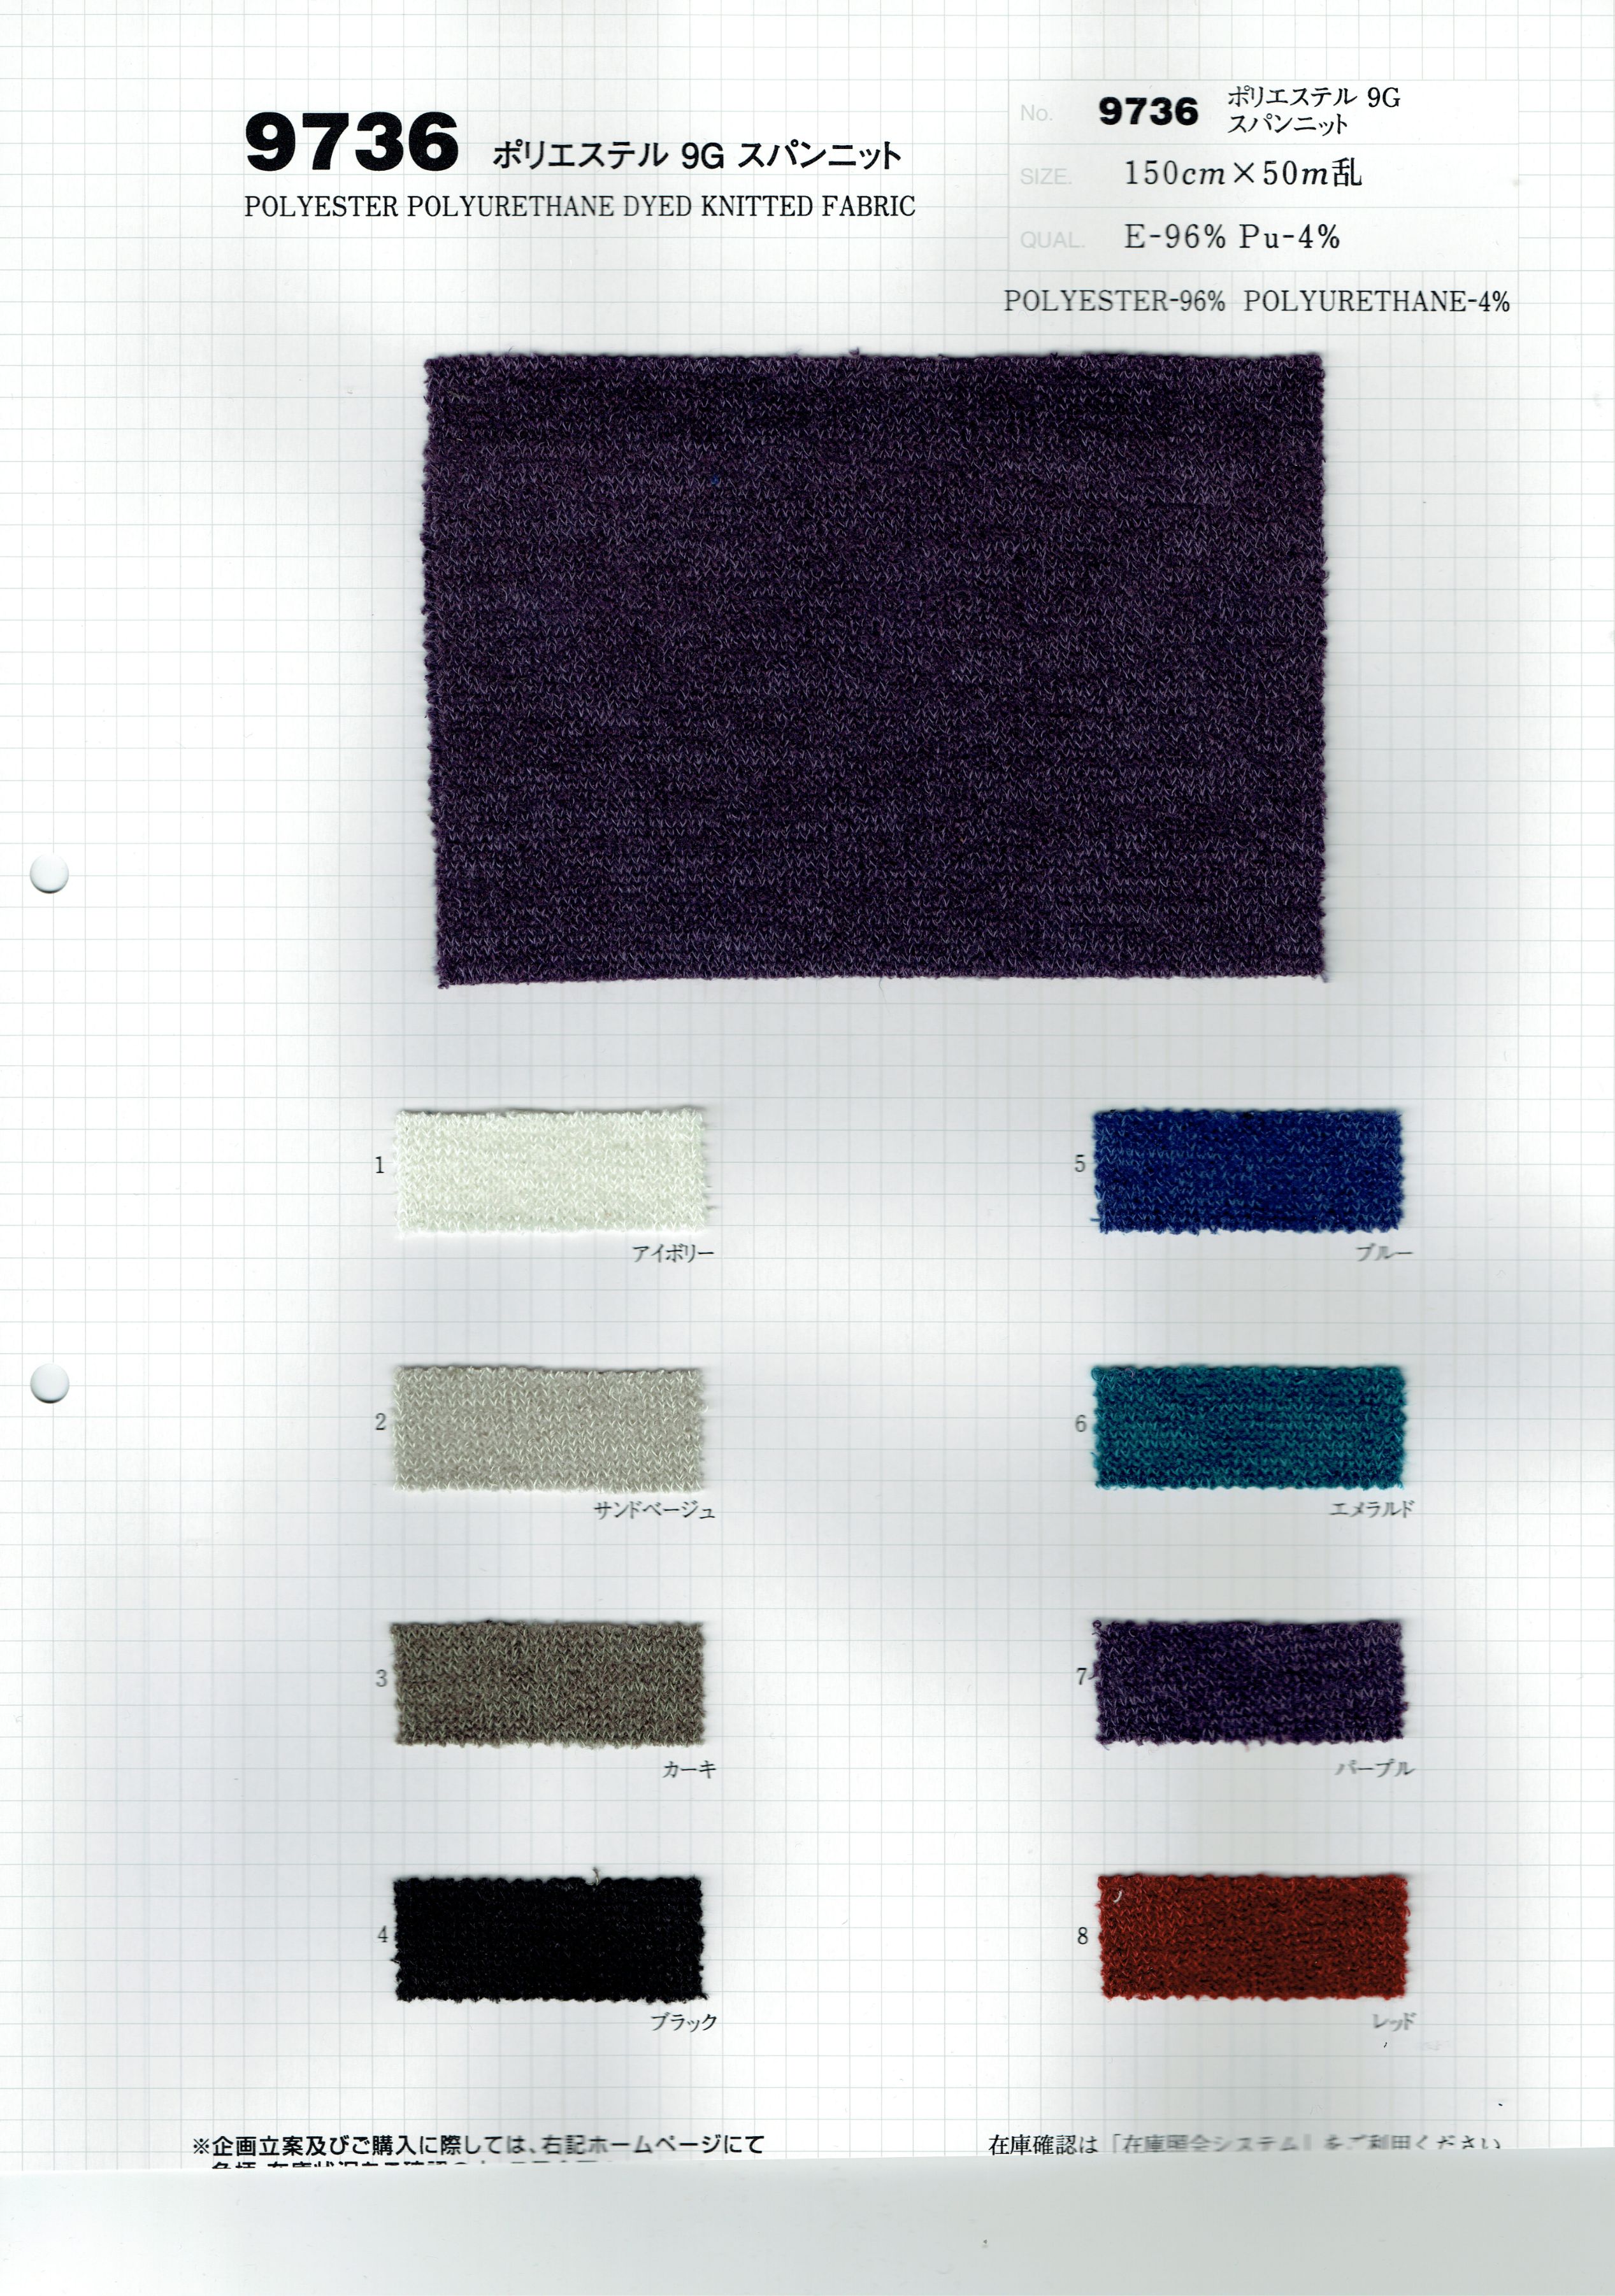 View 96% POLYESTER 4% POLYURETHANE DYED KNITTED FABRIC